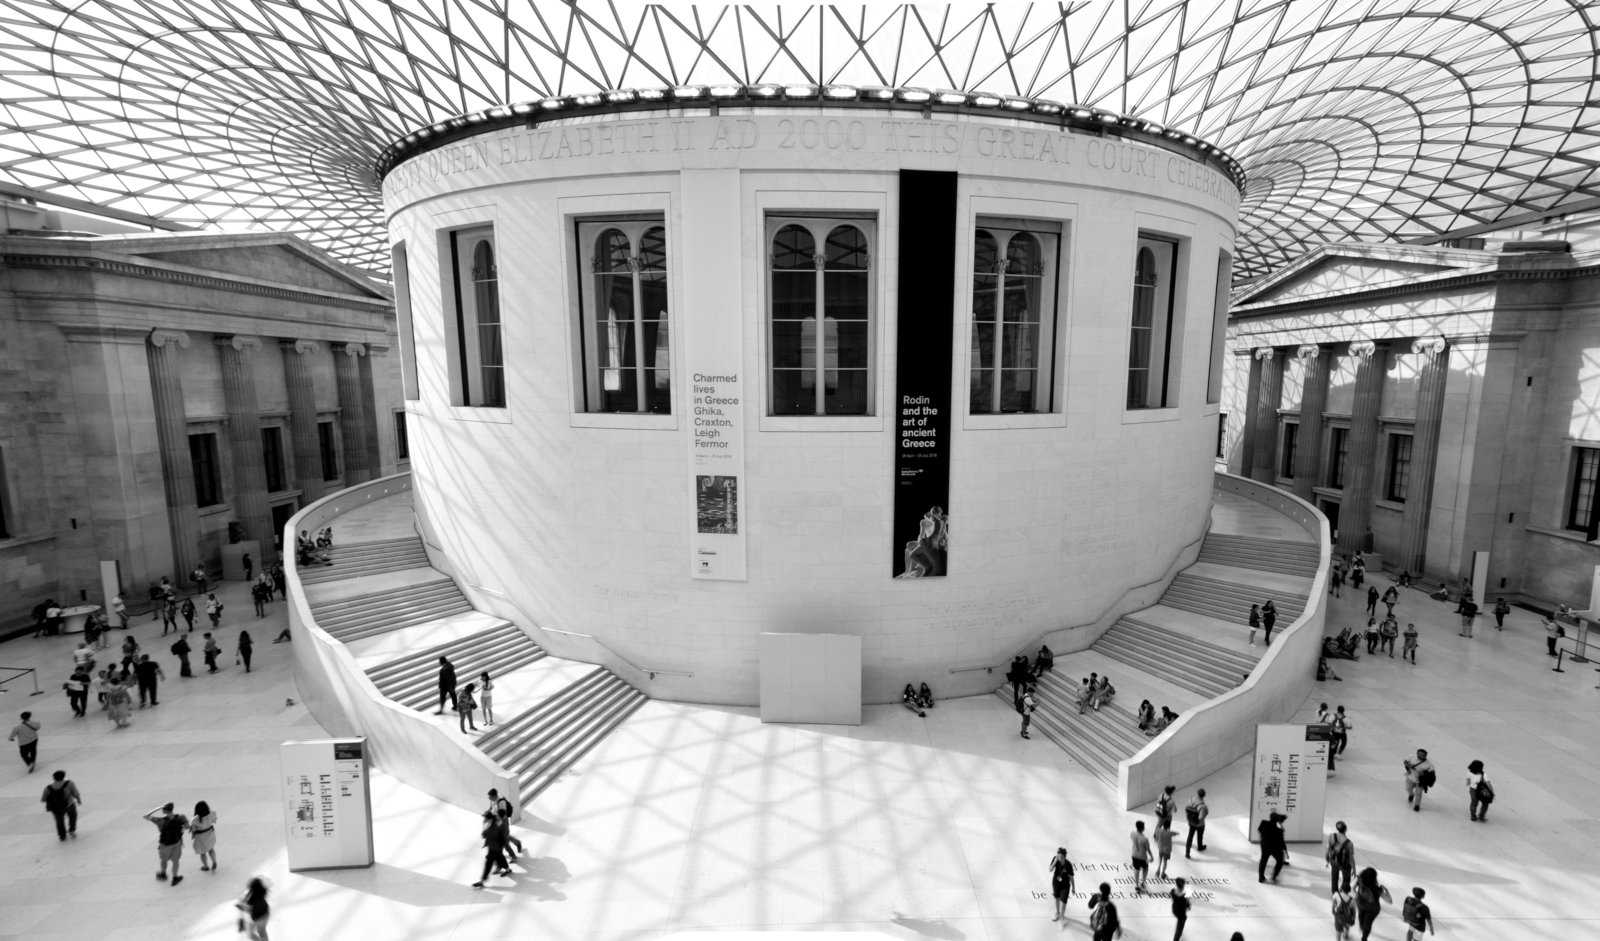 A black and white shot of the main foyer inside the British Museum in London.